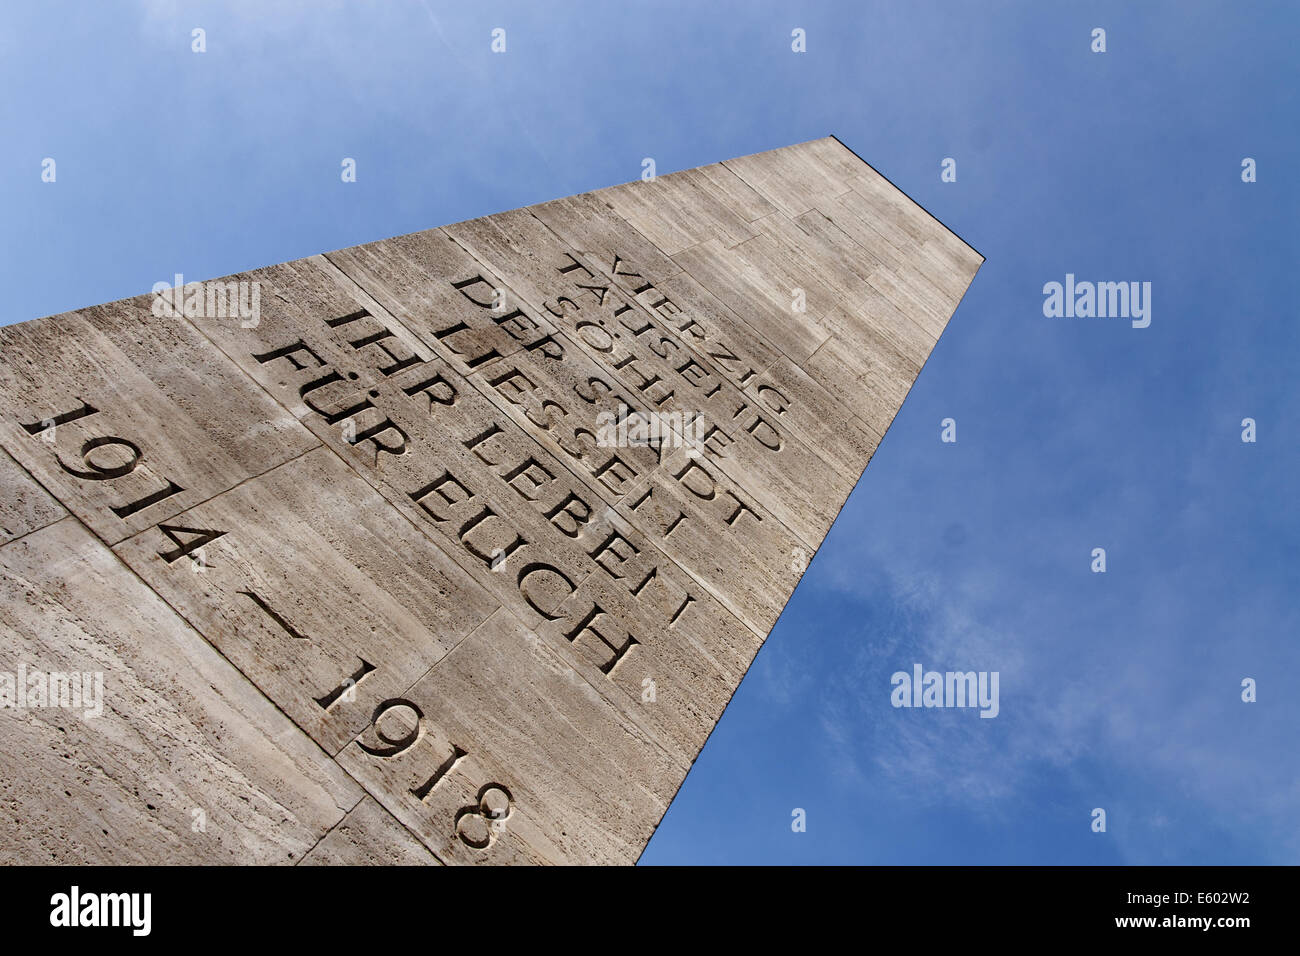 HAMBURG, GERMANY - SEPTEMBER 28, 2011: Monument for the dead of the First World War on the Rathausplatz in Hamburg, Germany on S Stock Photo